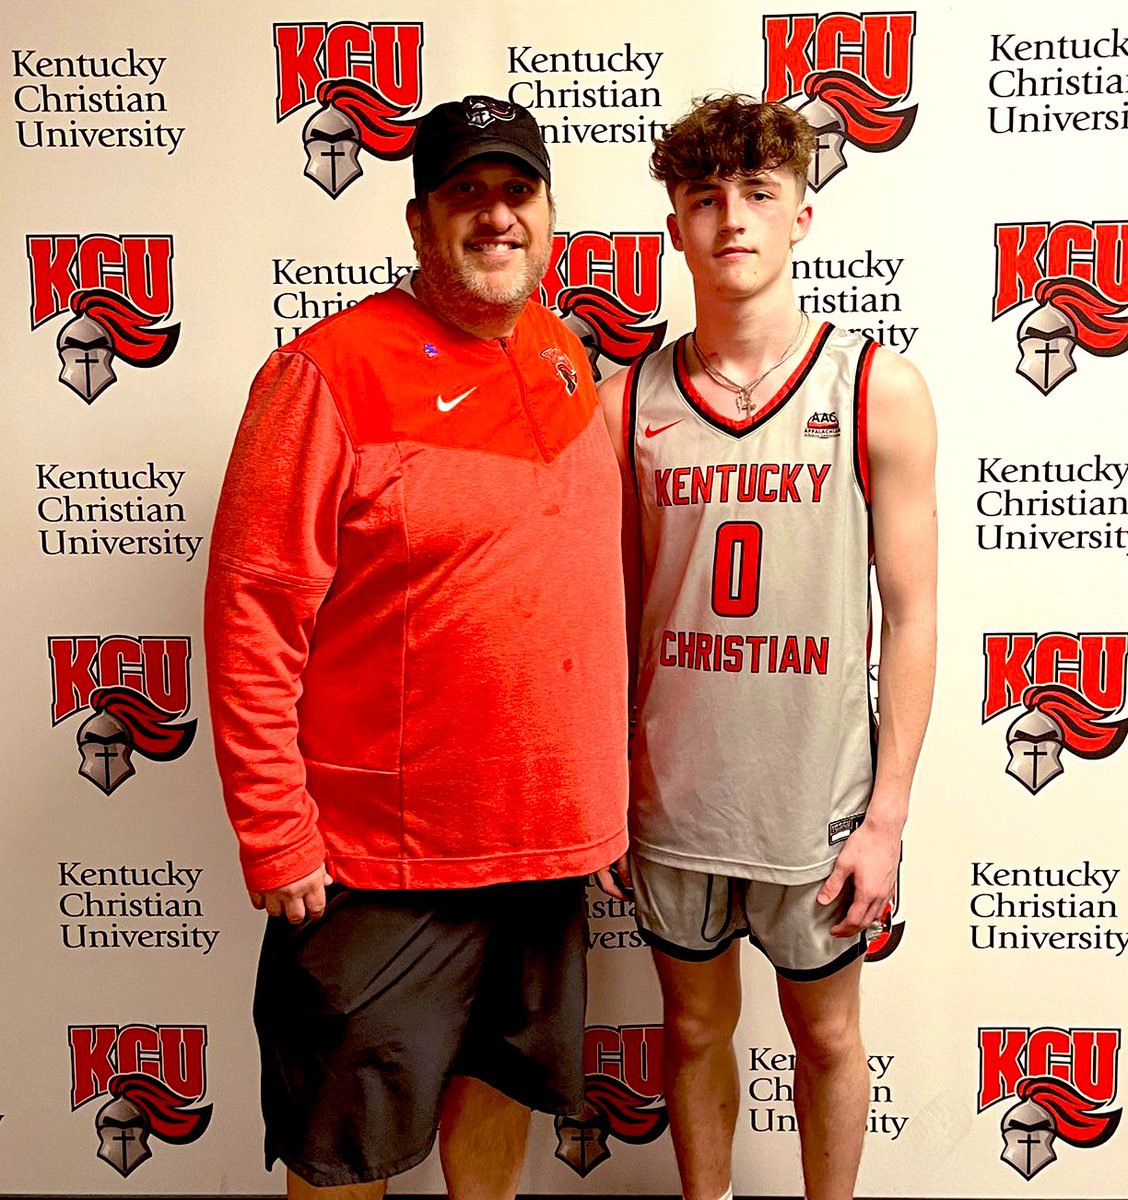 Betsy Layne sophomore Carter Parsons got an offer to continue his basketball and academic career at Kentucky Christian University. Parsons is one of the best sophomores in the area and averaged 13.5 points this past season. This definitely won't be Carter's last offer.